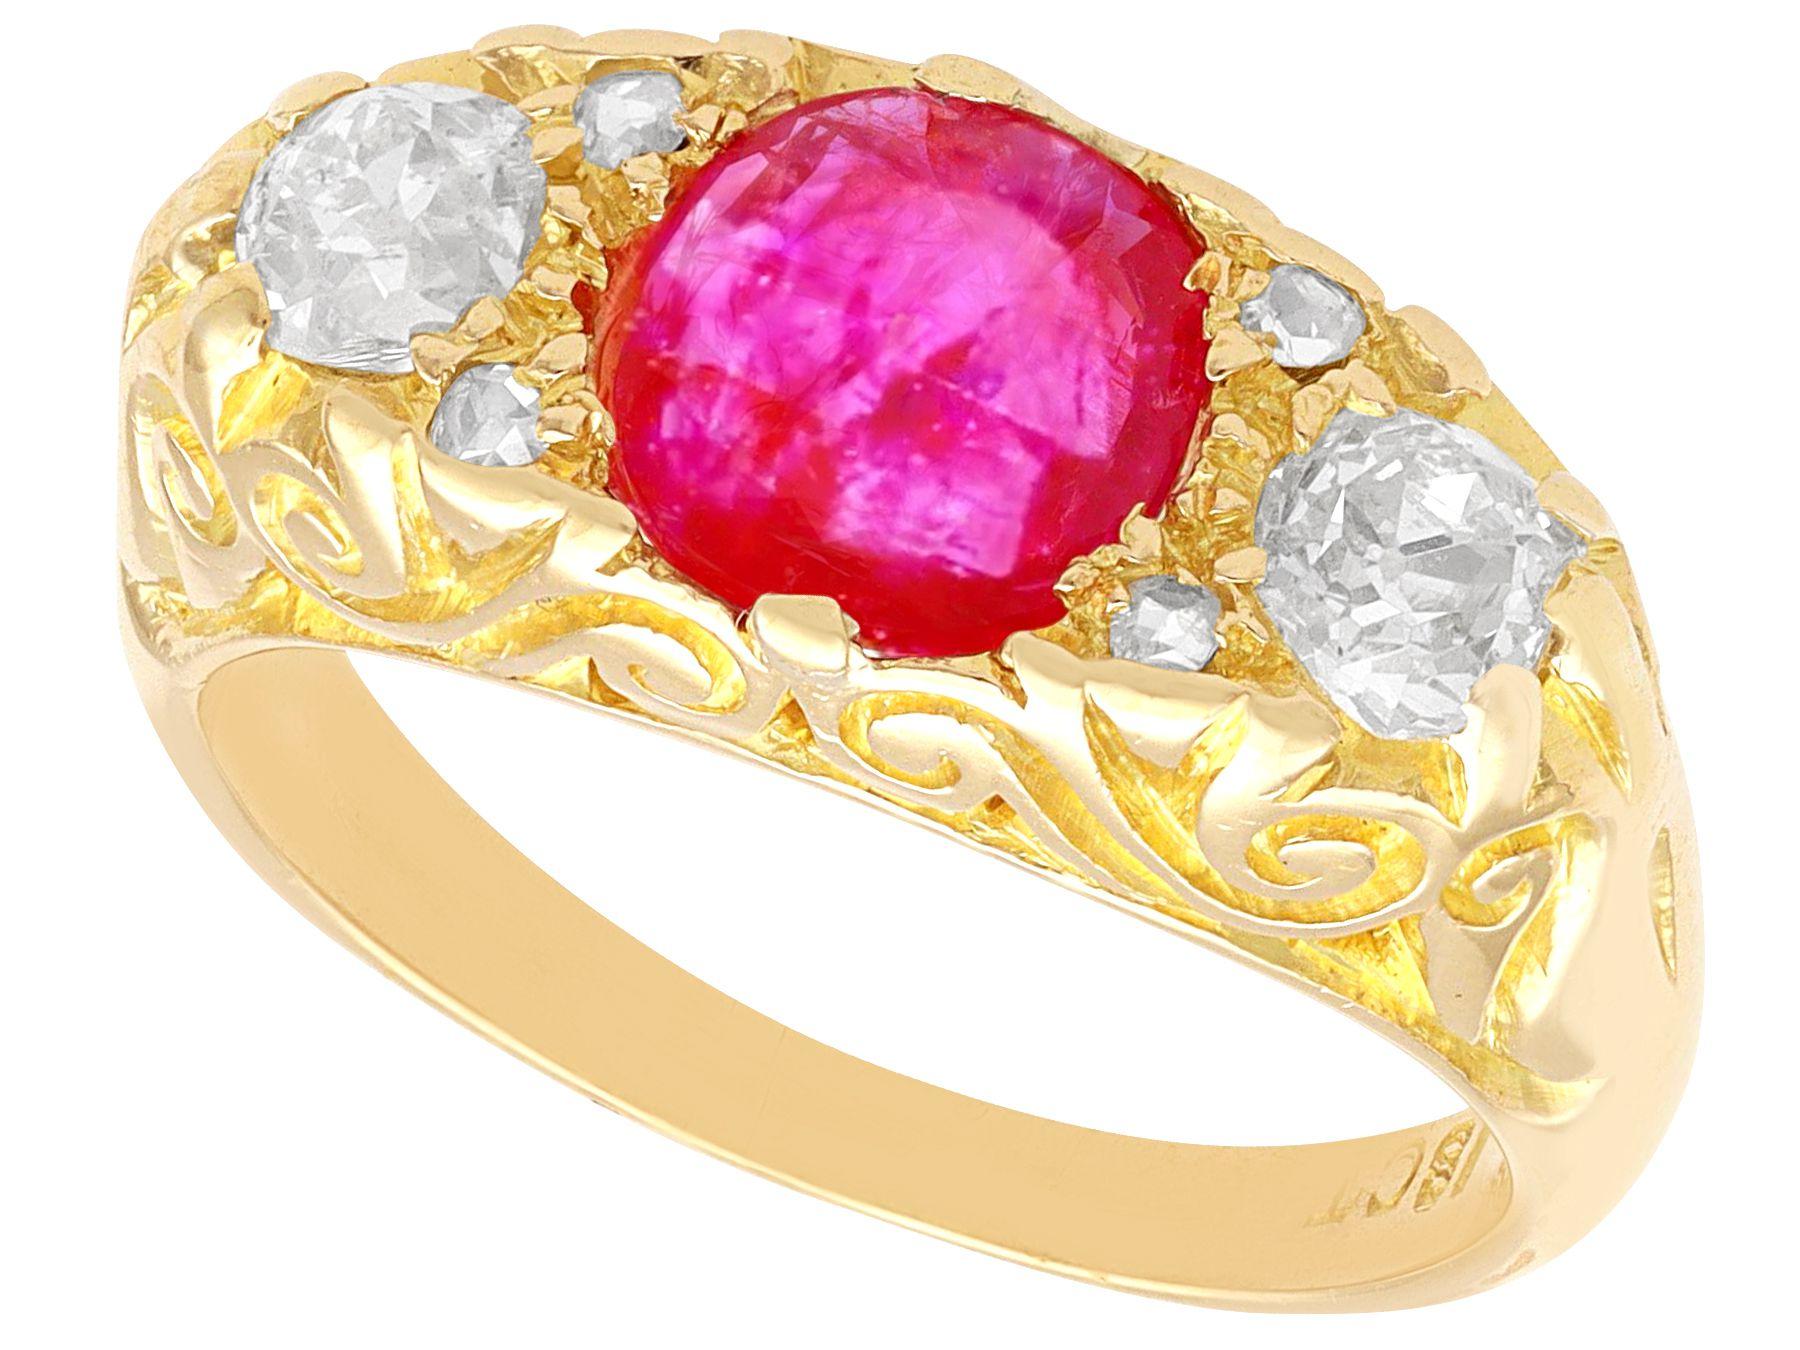 A stunning, fine and impressive 1.15 carat Burmese ruby and 1.36 carat diamond, 18 karat yellow gold three stone ring; part of our diverse gemstone ring collection.

This stunning, fine and impressive antique ruby and diamond ring has been crafted